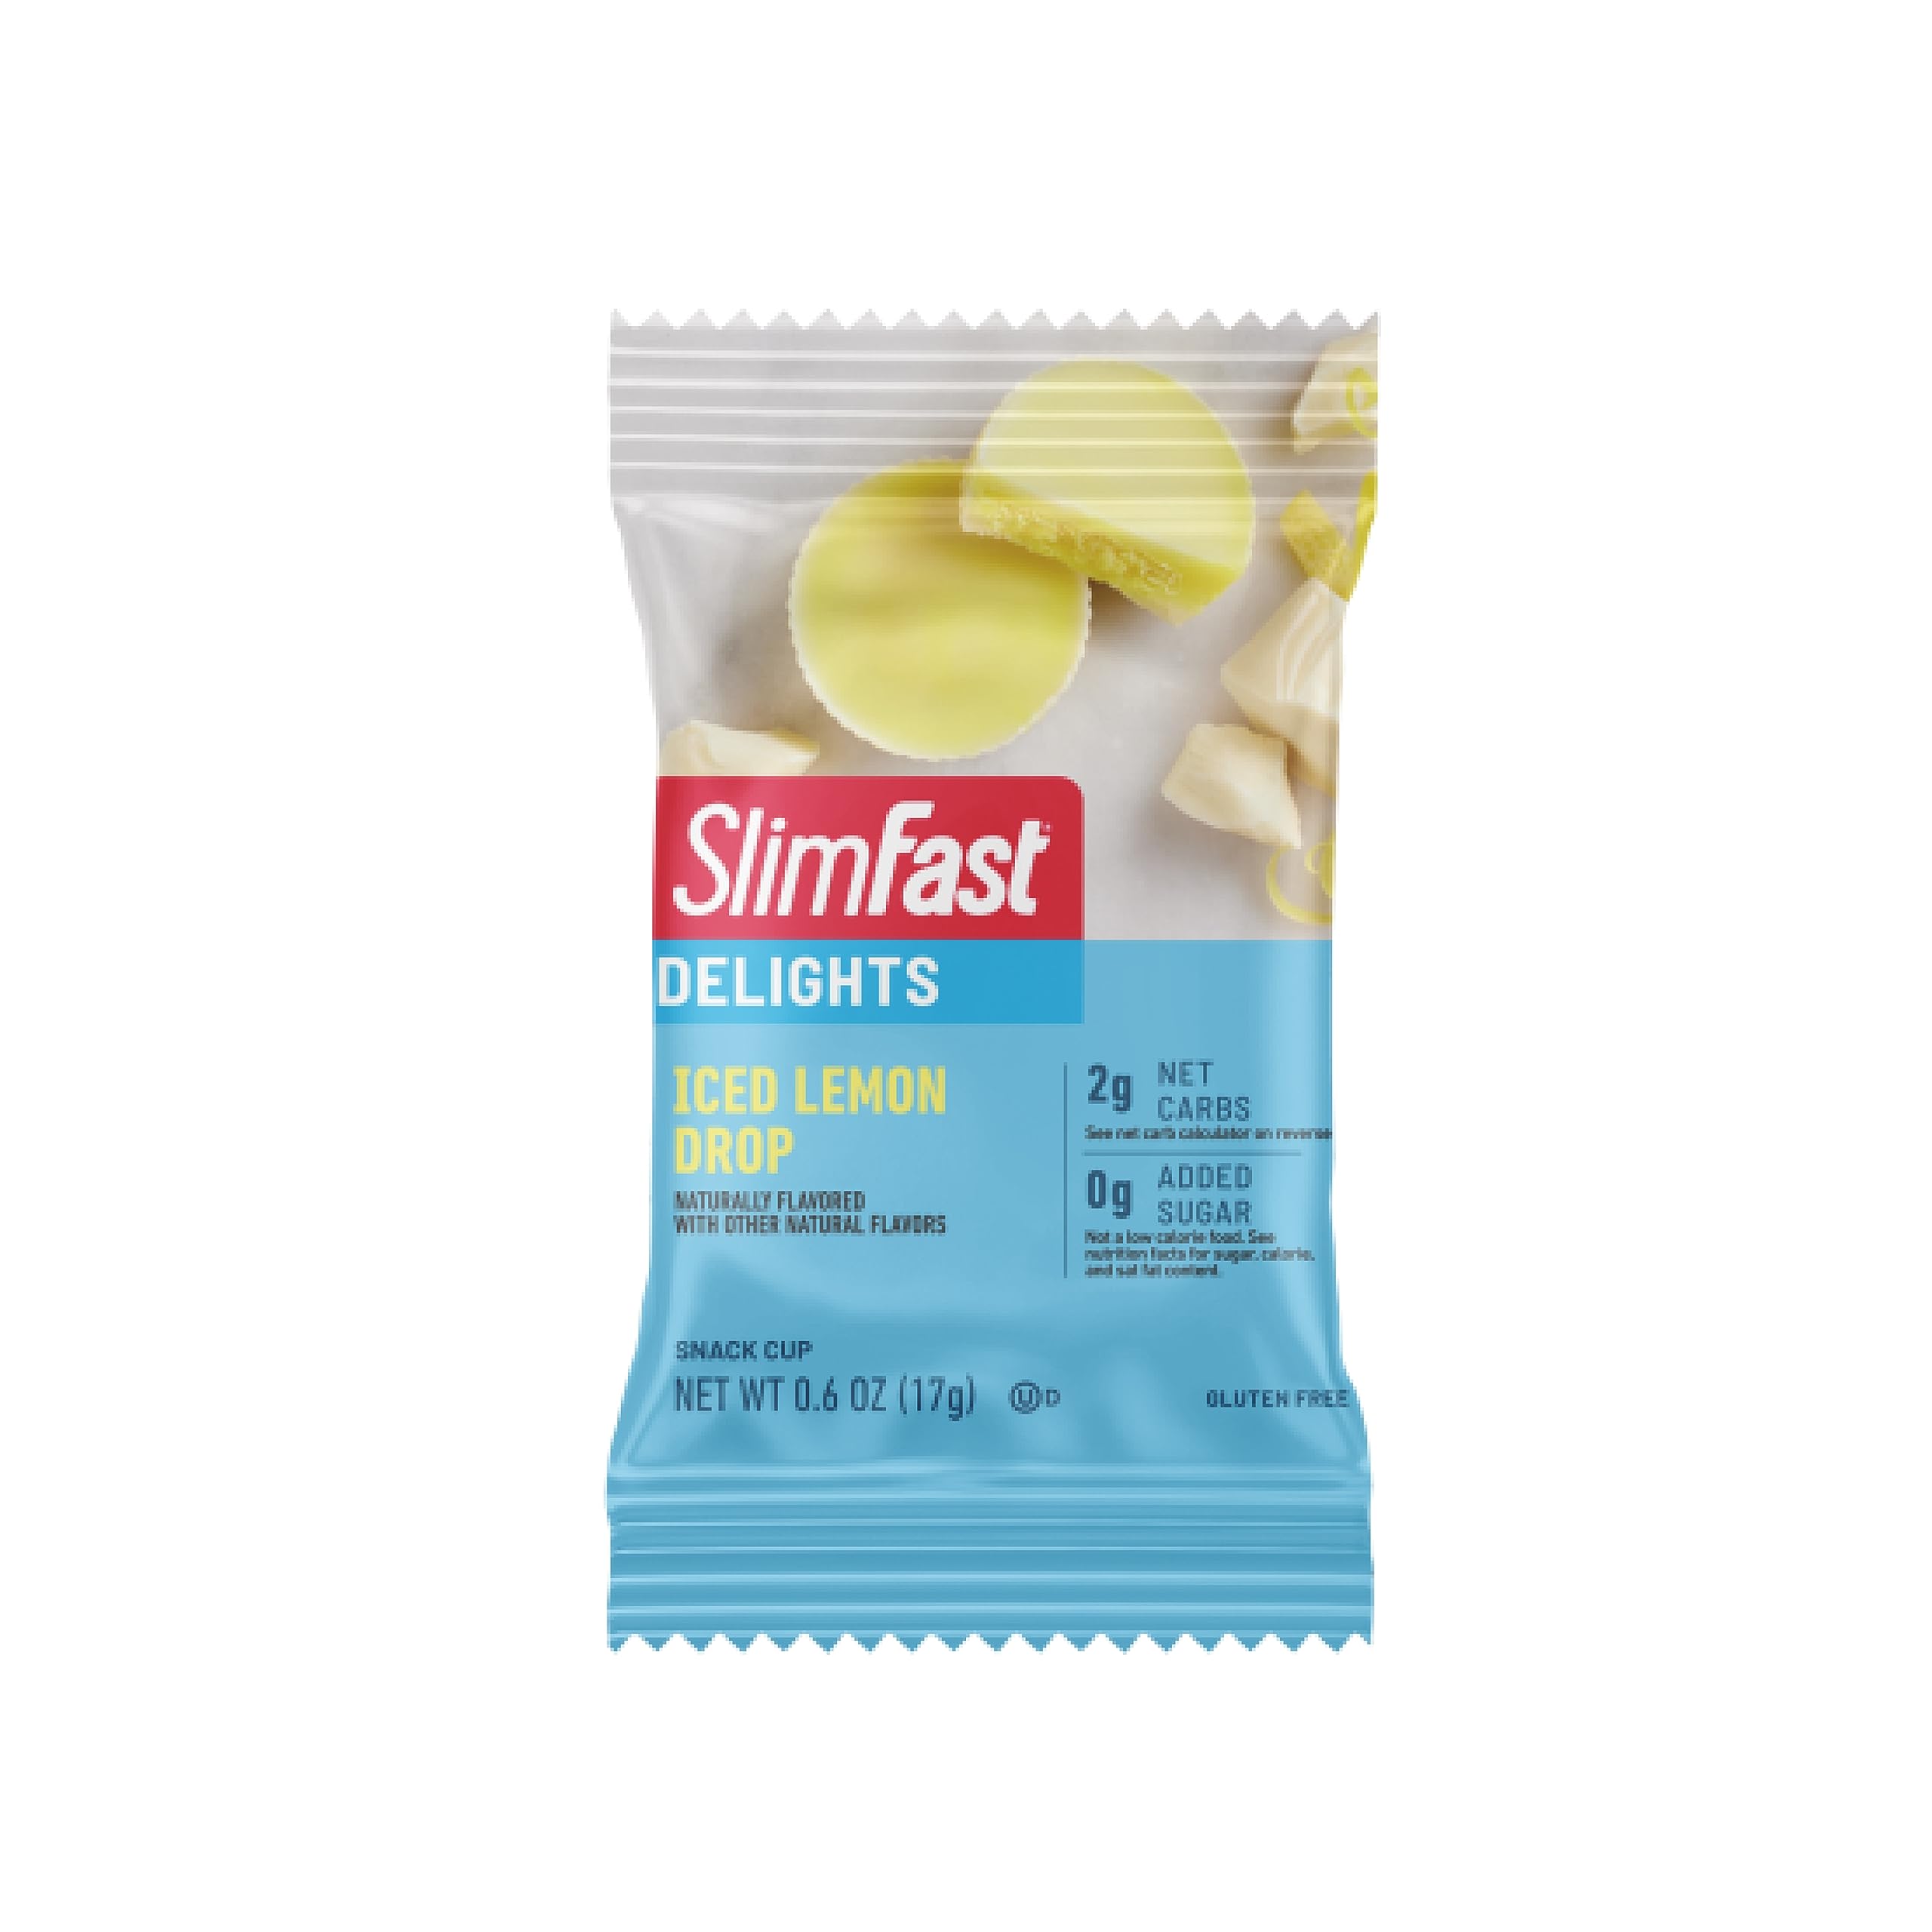 SlimFast Delights Iced Lemon Drop Snack Cup, 10 Count